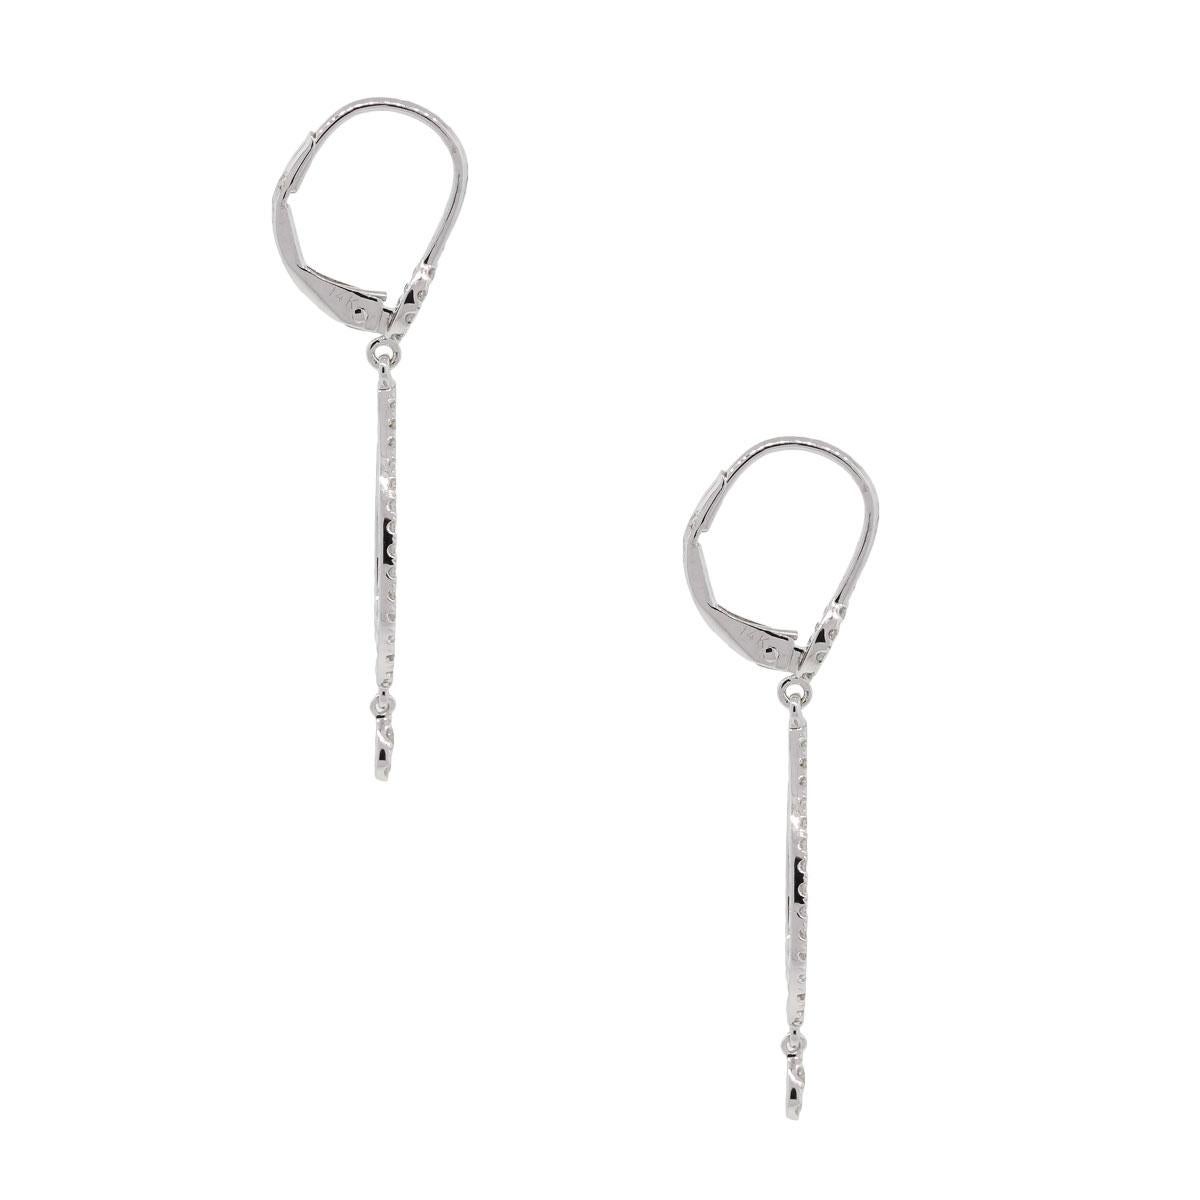 Designer: Meira T
Style: Meira T white gold 0.62ctw diamond pave tear drop earrings
Material: 14k White Gold
Diamond Details: Approximately 0.62ctw of round brilliant diamonds. Diamonds are G/H in color and SI in clarity
Earring Measurements: 1.50″